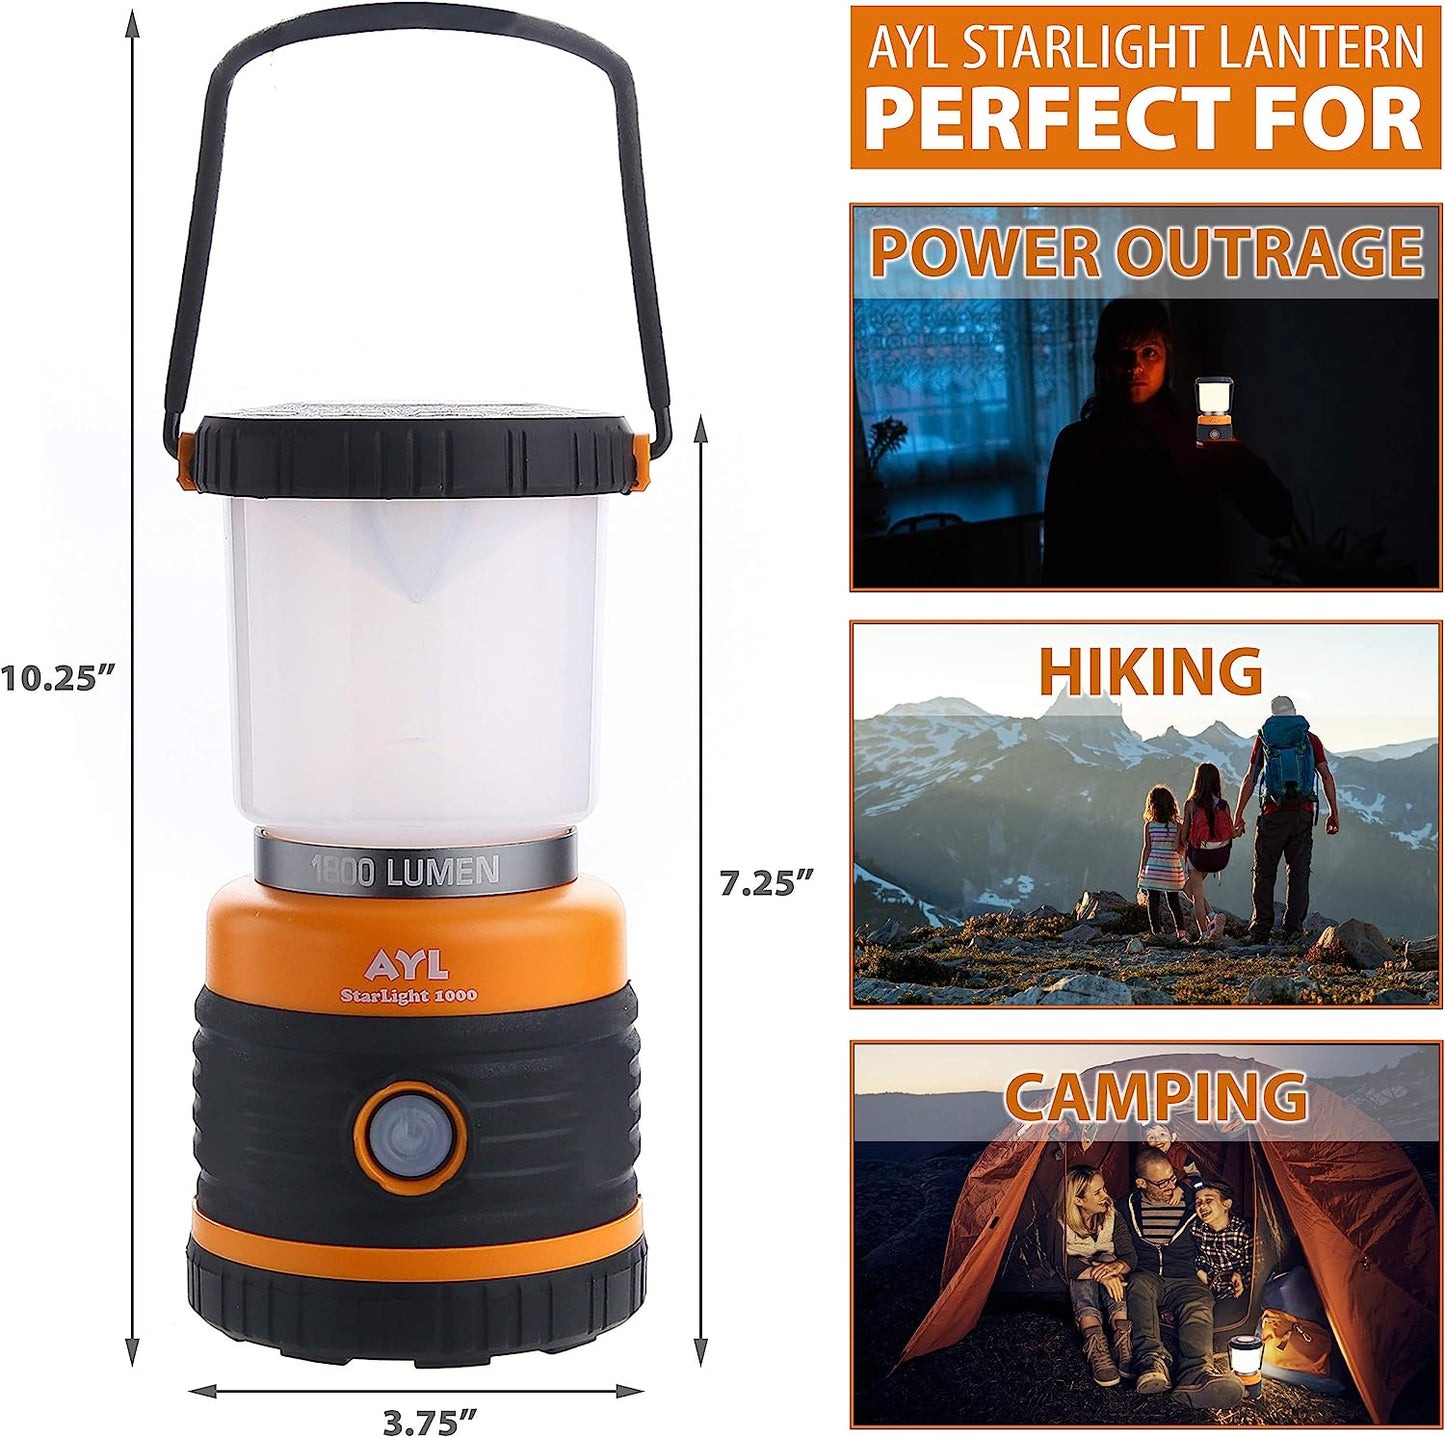 AYL LED Camping Lantern, Battery Powered LED 1800LM, 4 Camping Lights Modes, Perfect Lantern Flashlight for Hurricane, Emergency Light, Storm, Power Outages, Survival Kits, Hiking, Fishing, Tent, Home